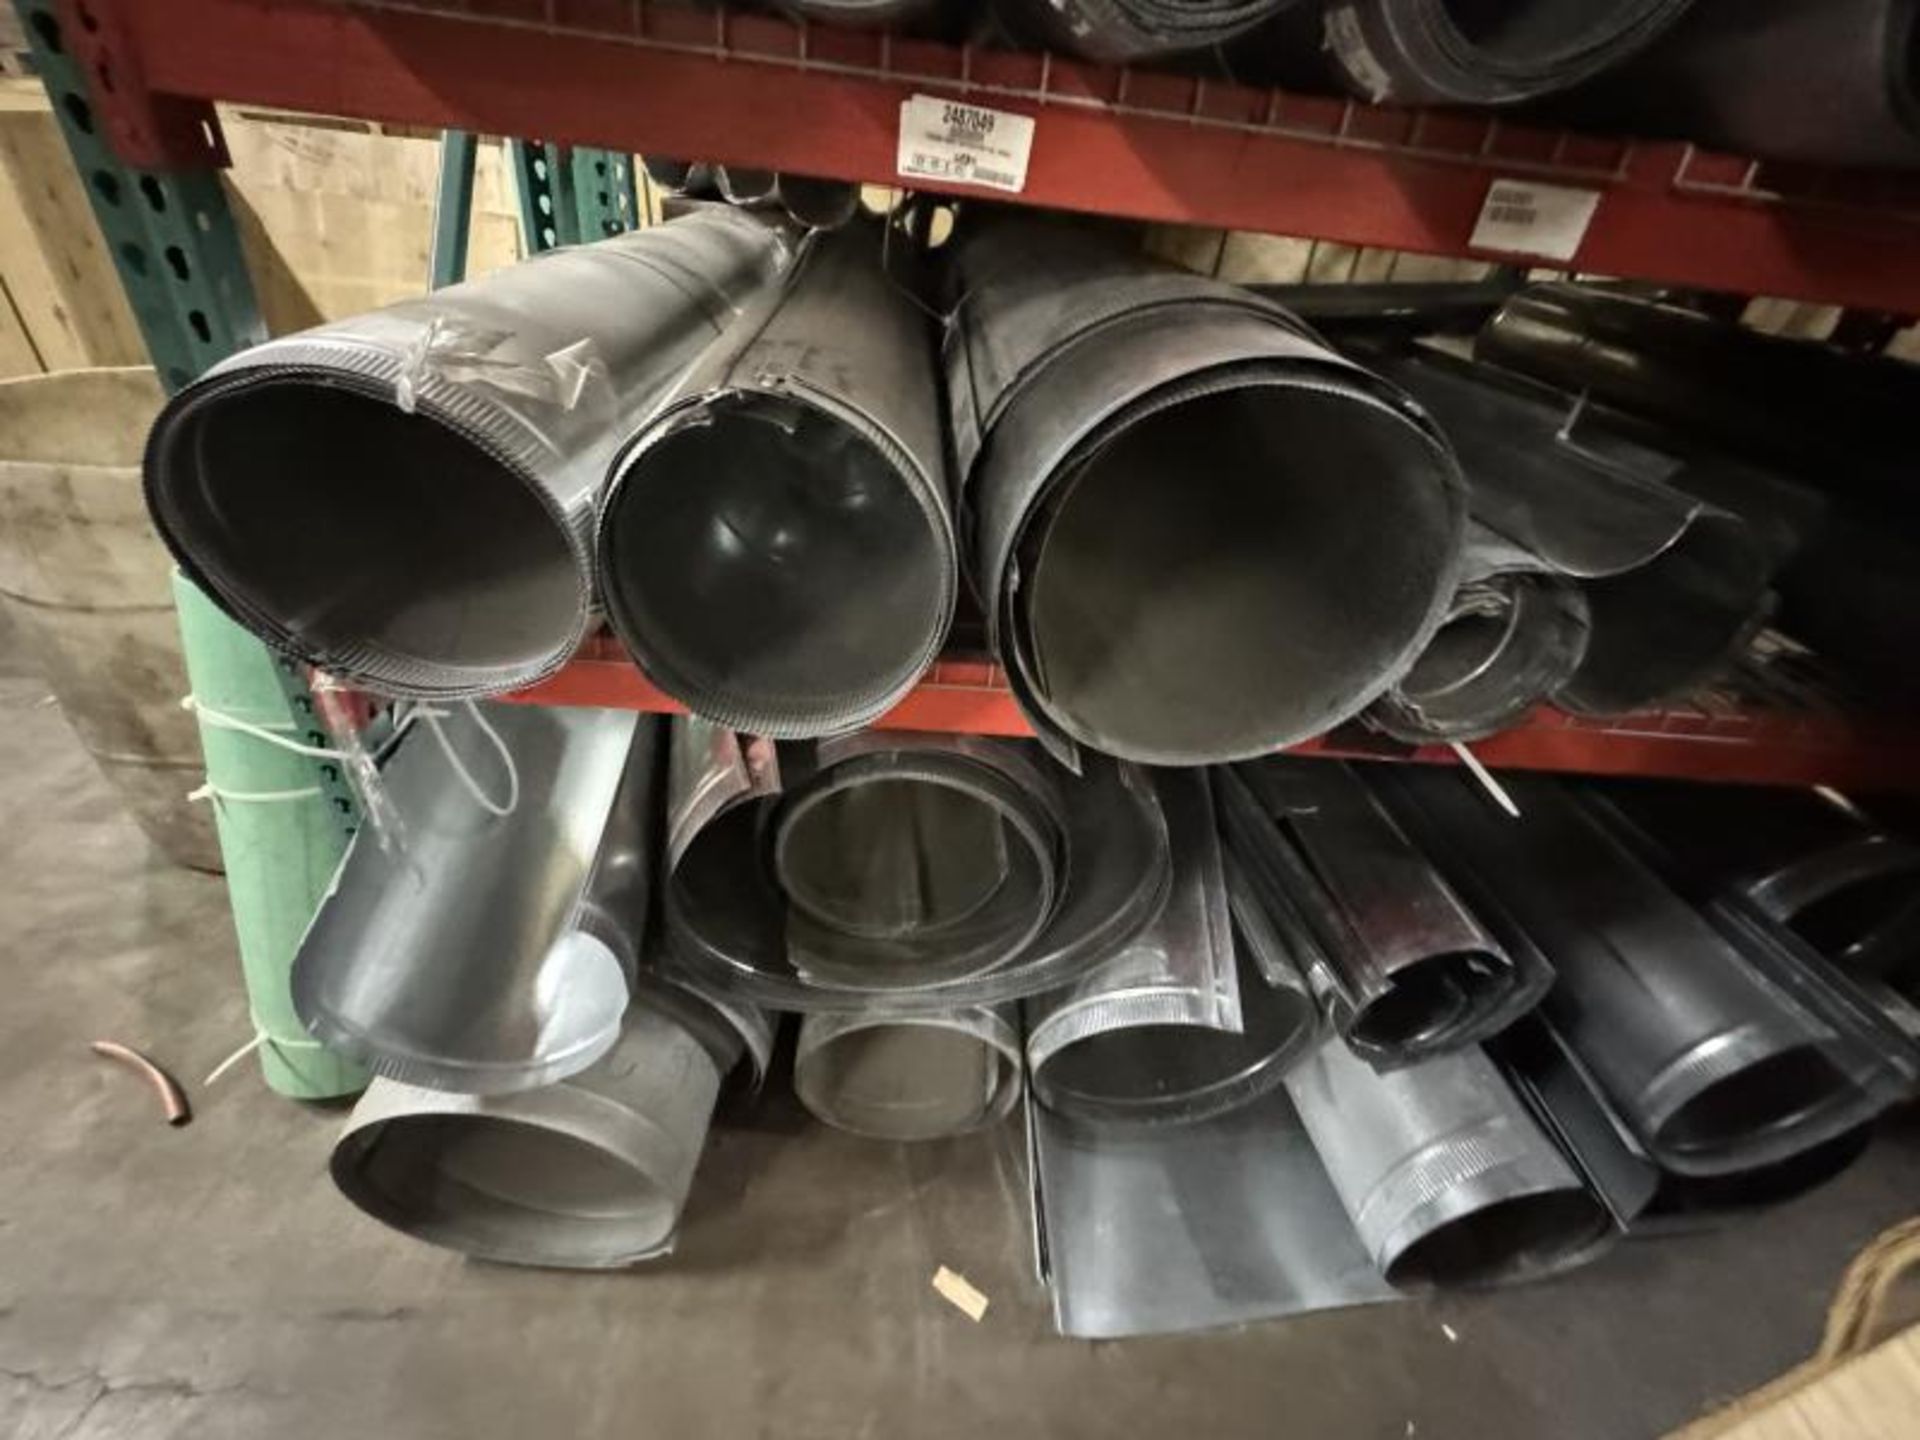 Large Group Lot: Contents of Shelving: Galazined Parts, Liners, Collars, Vent Parts & PVC - Image 4 of 35